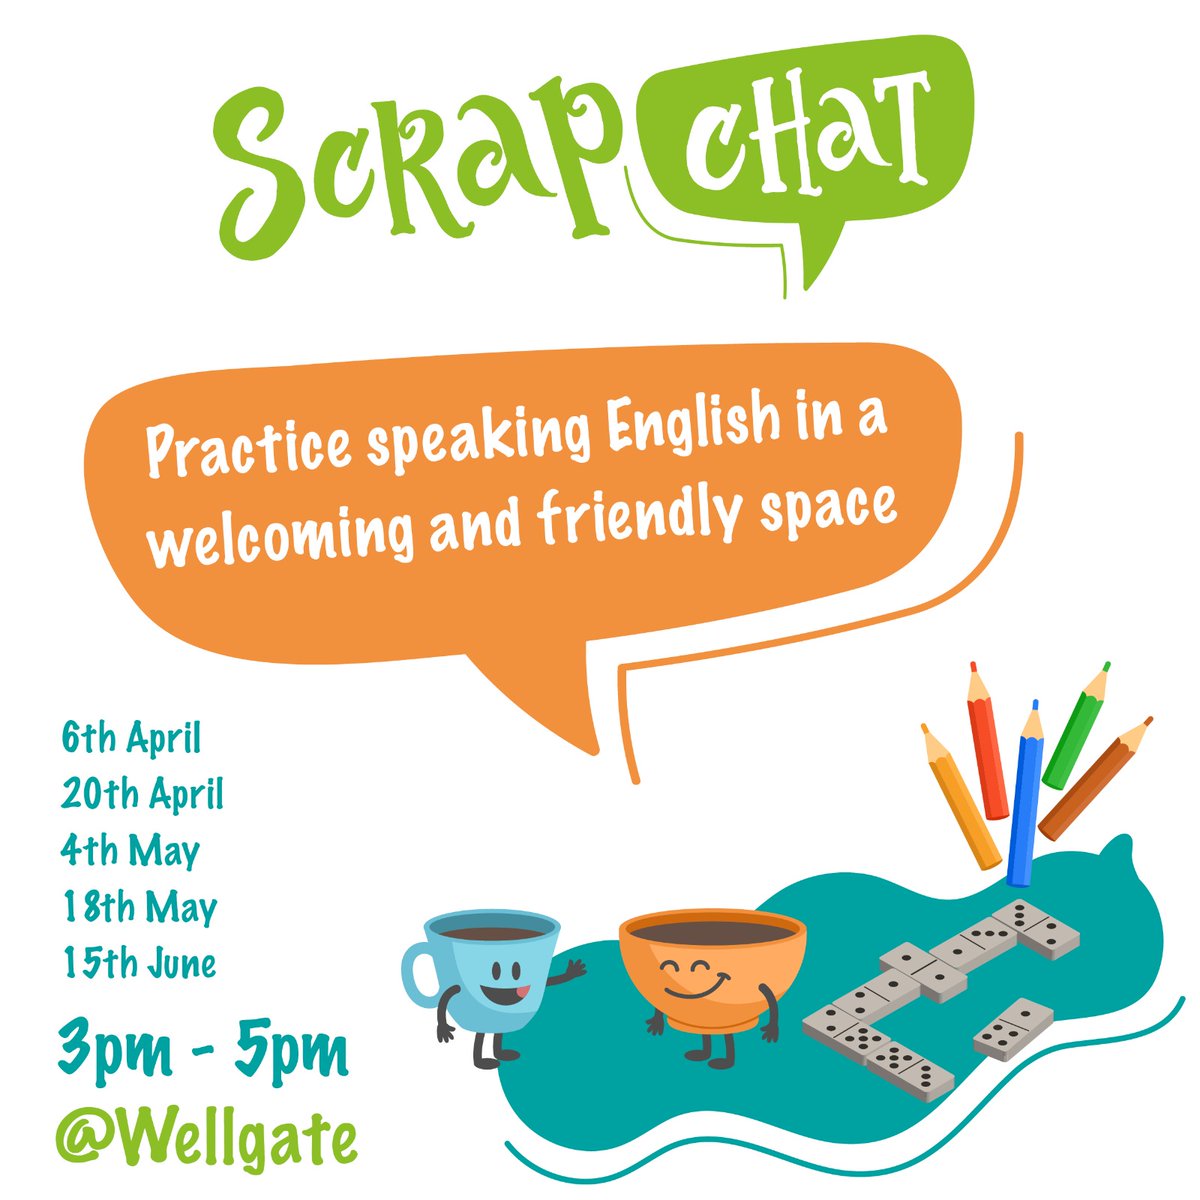 Have you came along to ScrapChat yet? 🌟All welcome 🌟Free Saturdays @ 3pm - 5pm 🌟ScrapAntics Community Space Wellgate Shopping Centre facebook.com/events/4014984… 4th May 18th May 1st June 15th June Please contact Neil with any questions; neil@scrapantics.co.uk 07837 559 397